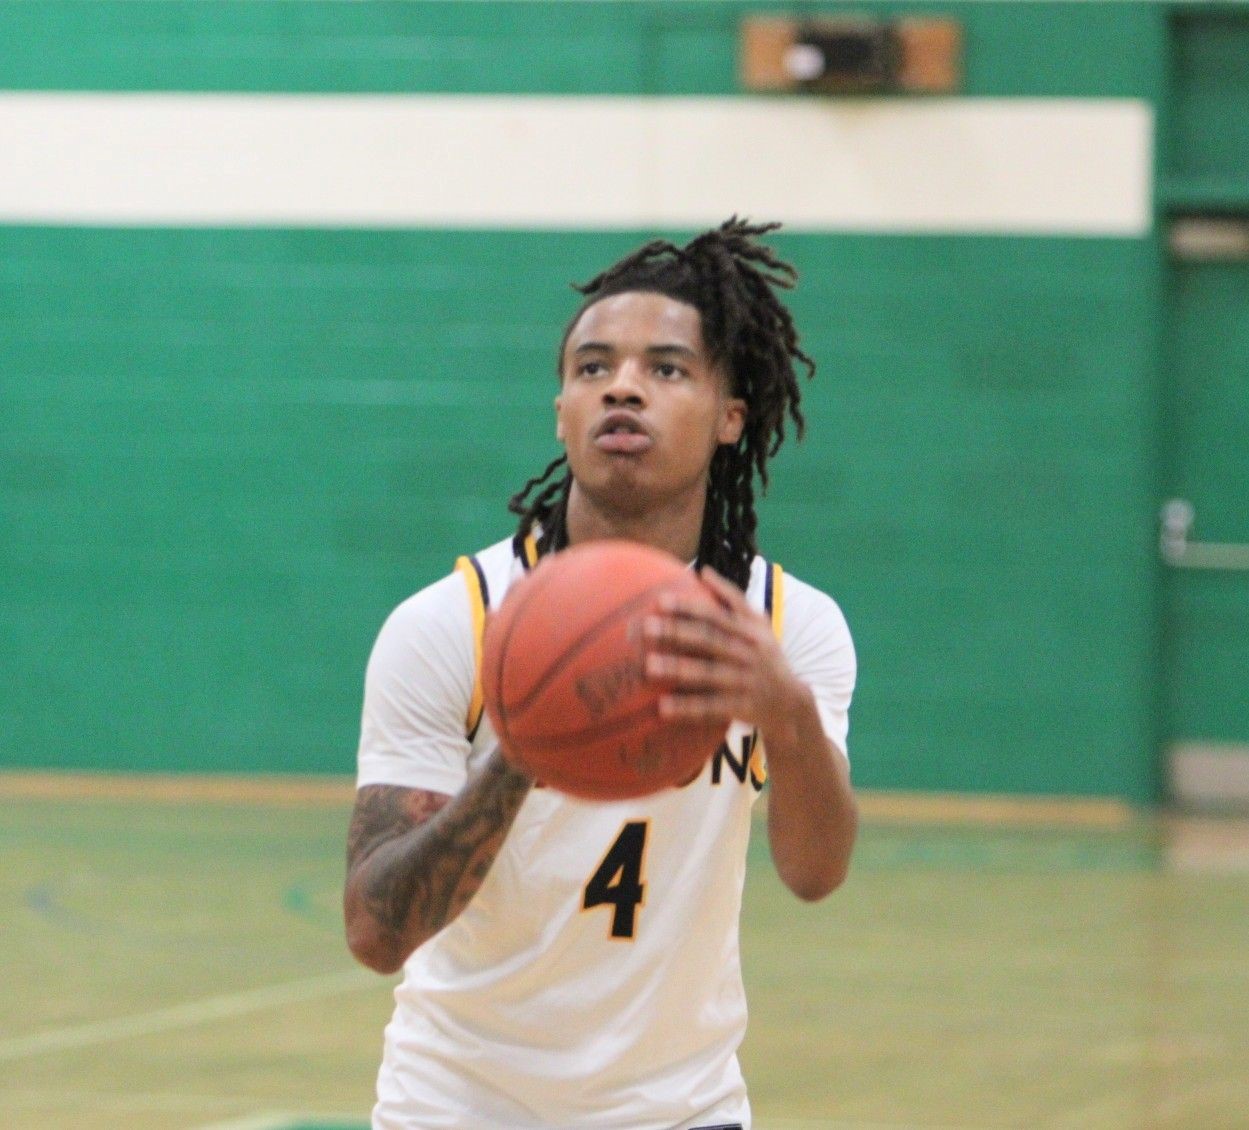 Asil Hoyle had a team-high 26 points for Gaston College on Wednesday night.